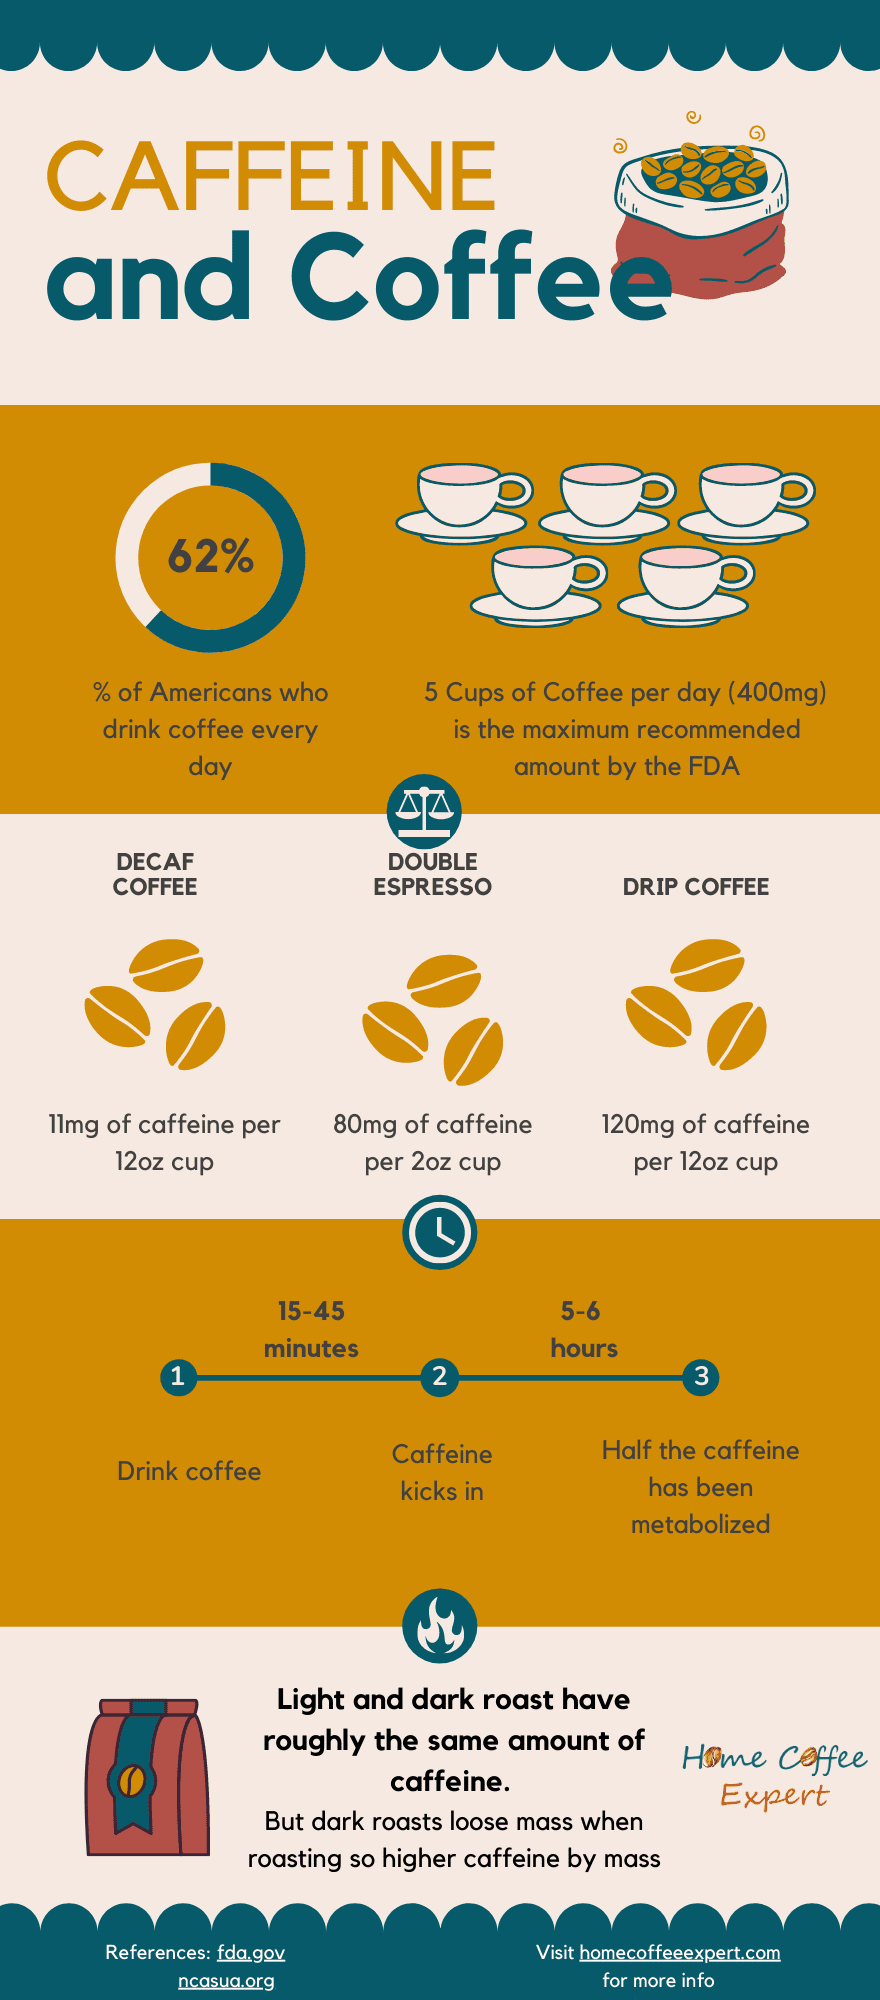 Infographic displaying the top facts about caffeine and coffee